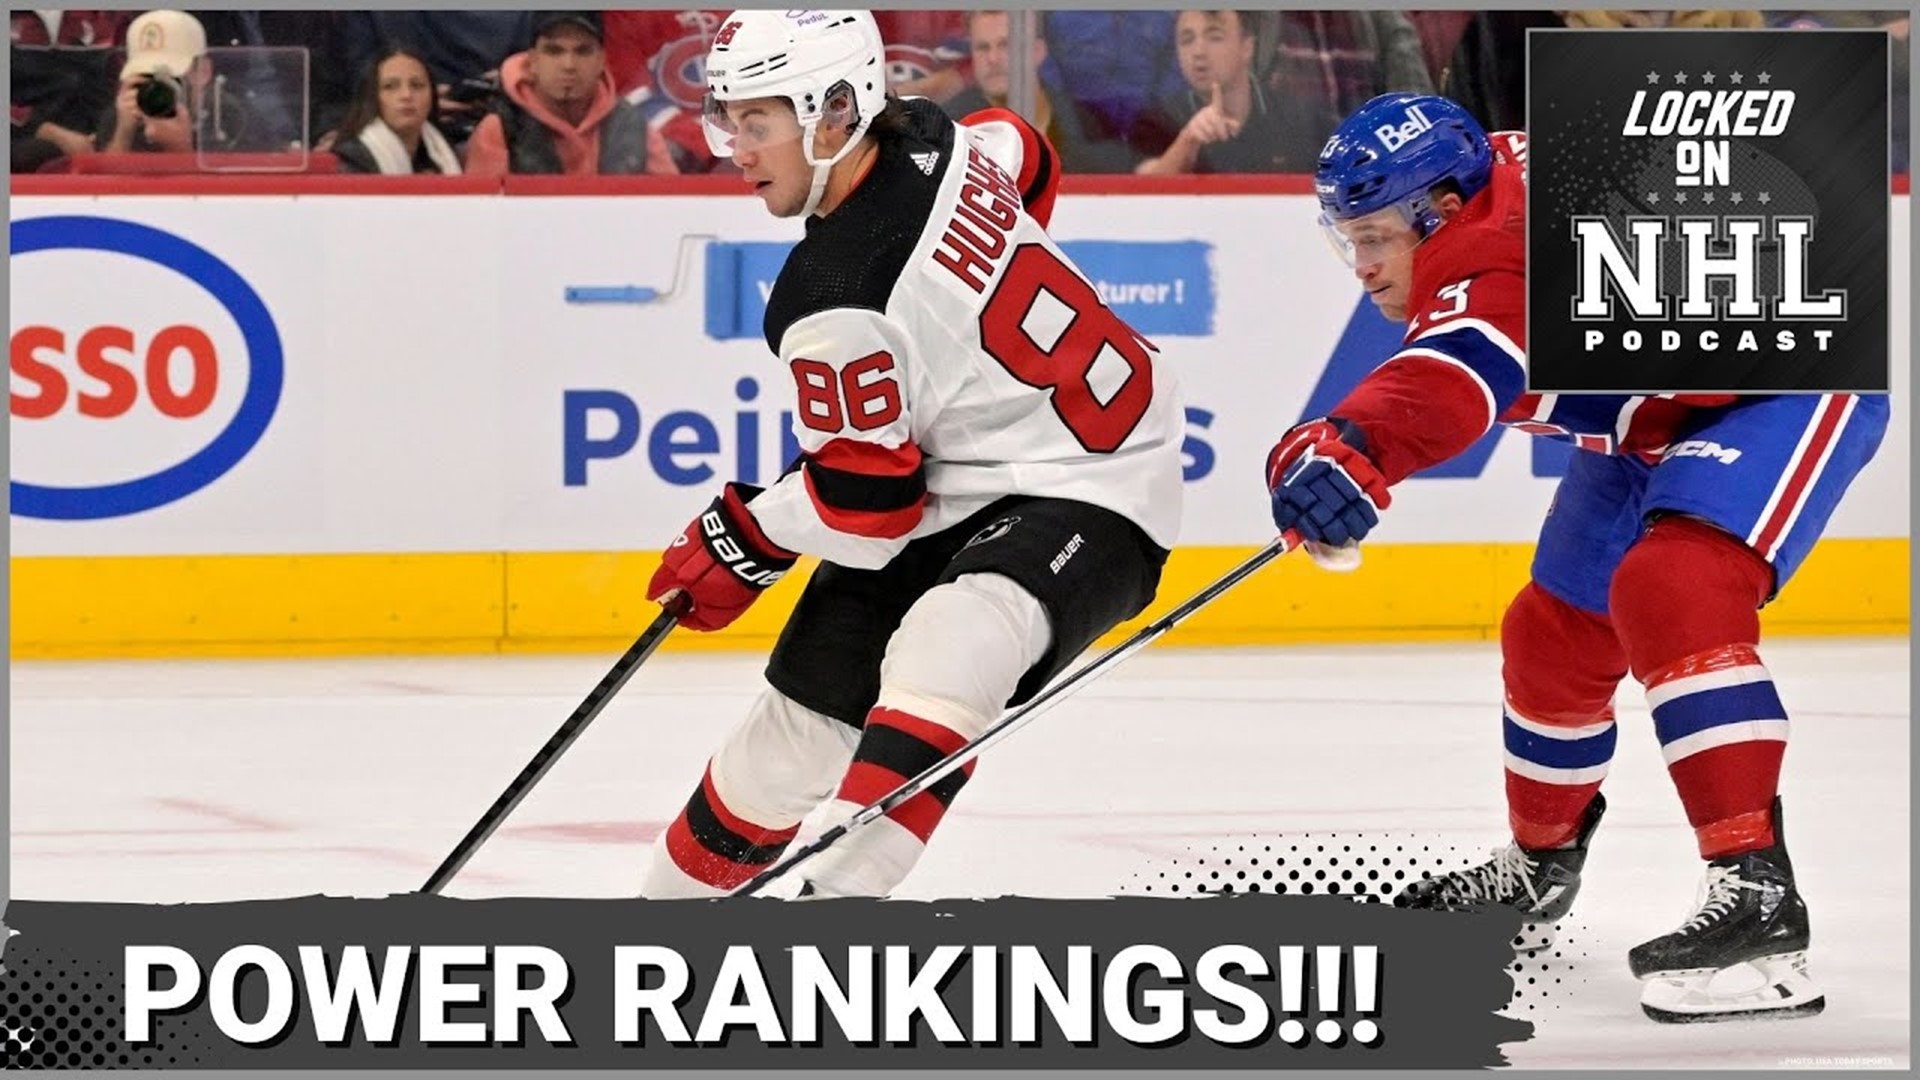 In this edition of the Locked On NHL podcast, Hunter and Jay give their thoughts on the latest power rankings that were voted on by the hosts of the Locked On NHL.